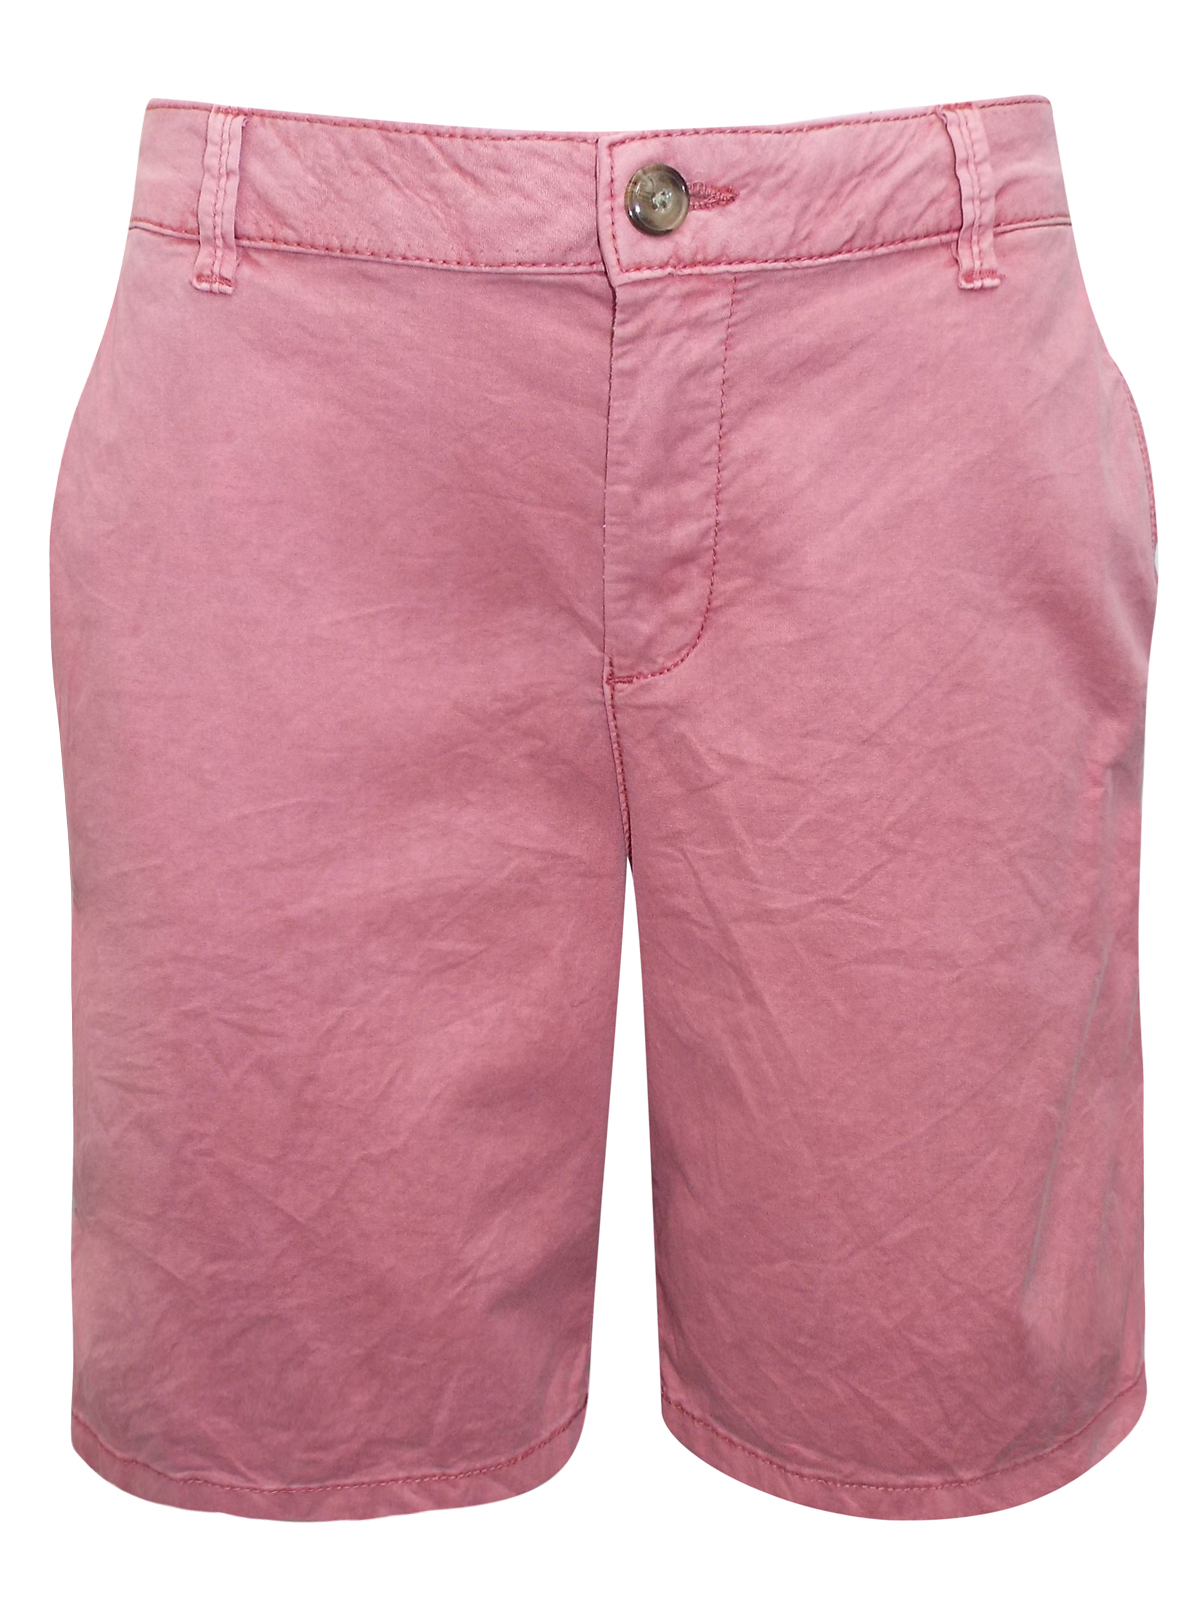 Esprit - - 3Sprit ROSE Cotton Rich Long Chino Shorts - Size 6 to 16